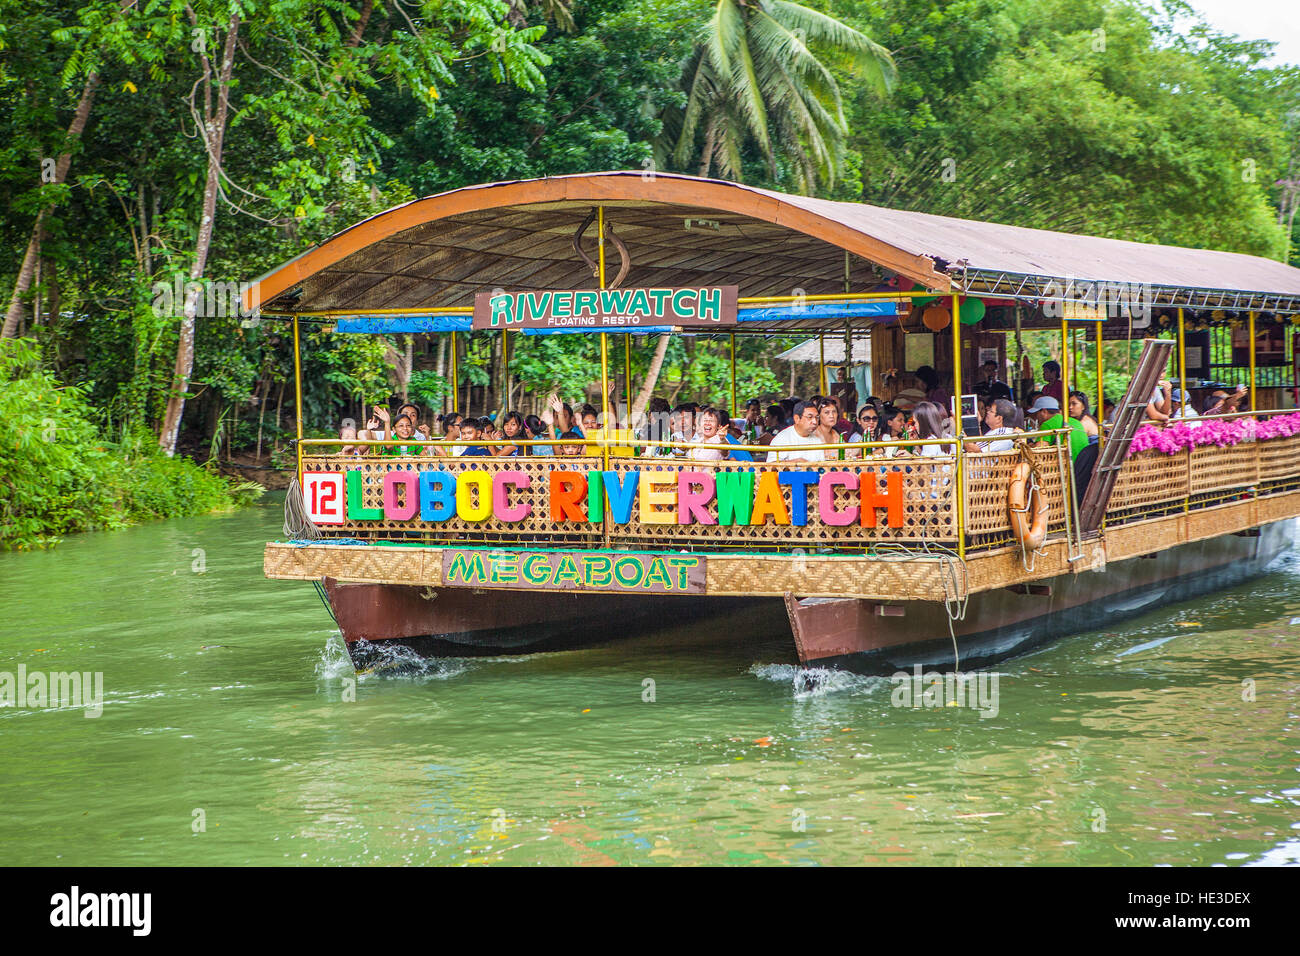 Passengers enjoy a meal and sightseeing aboard a Loboc Riverwatch floating restaurant on Bohol Island, Philippines, Southeast Asia. Stock Photo